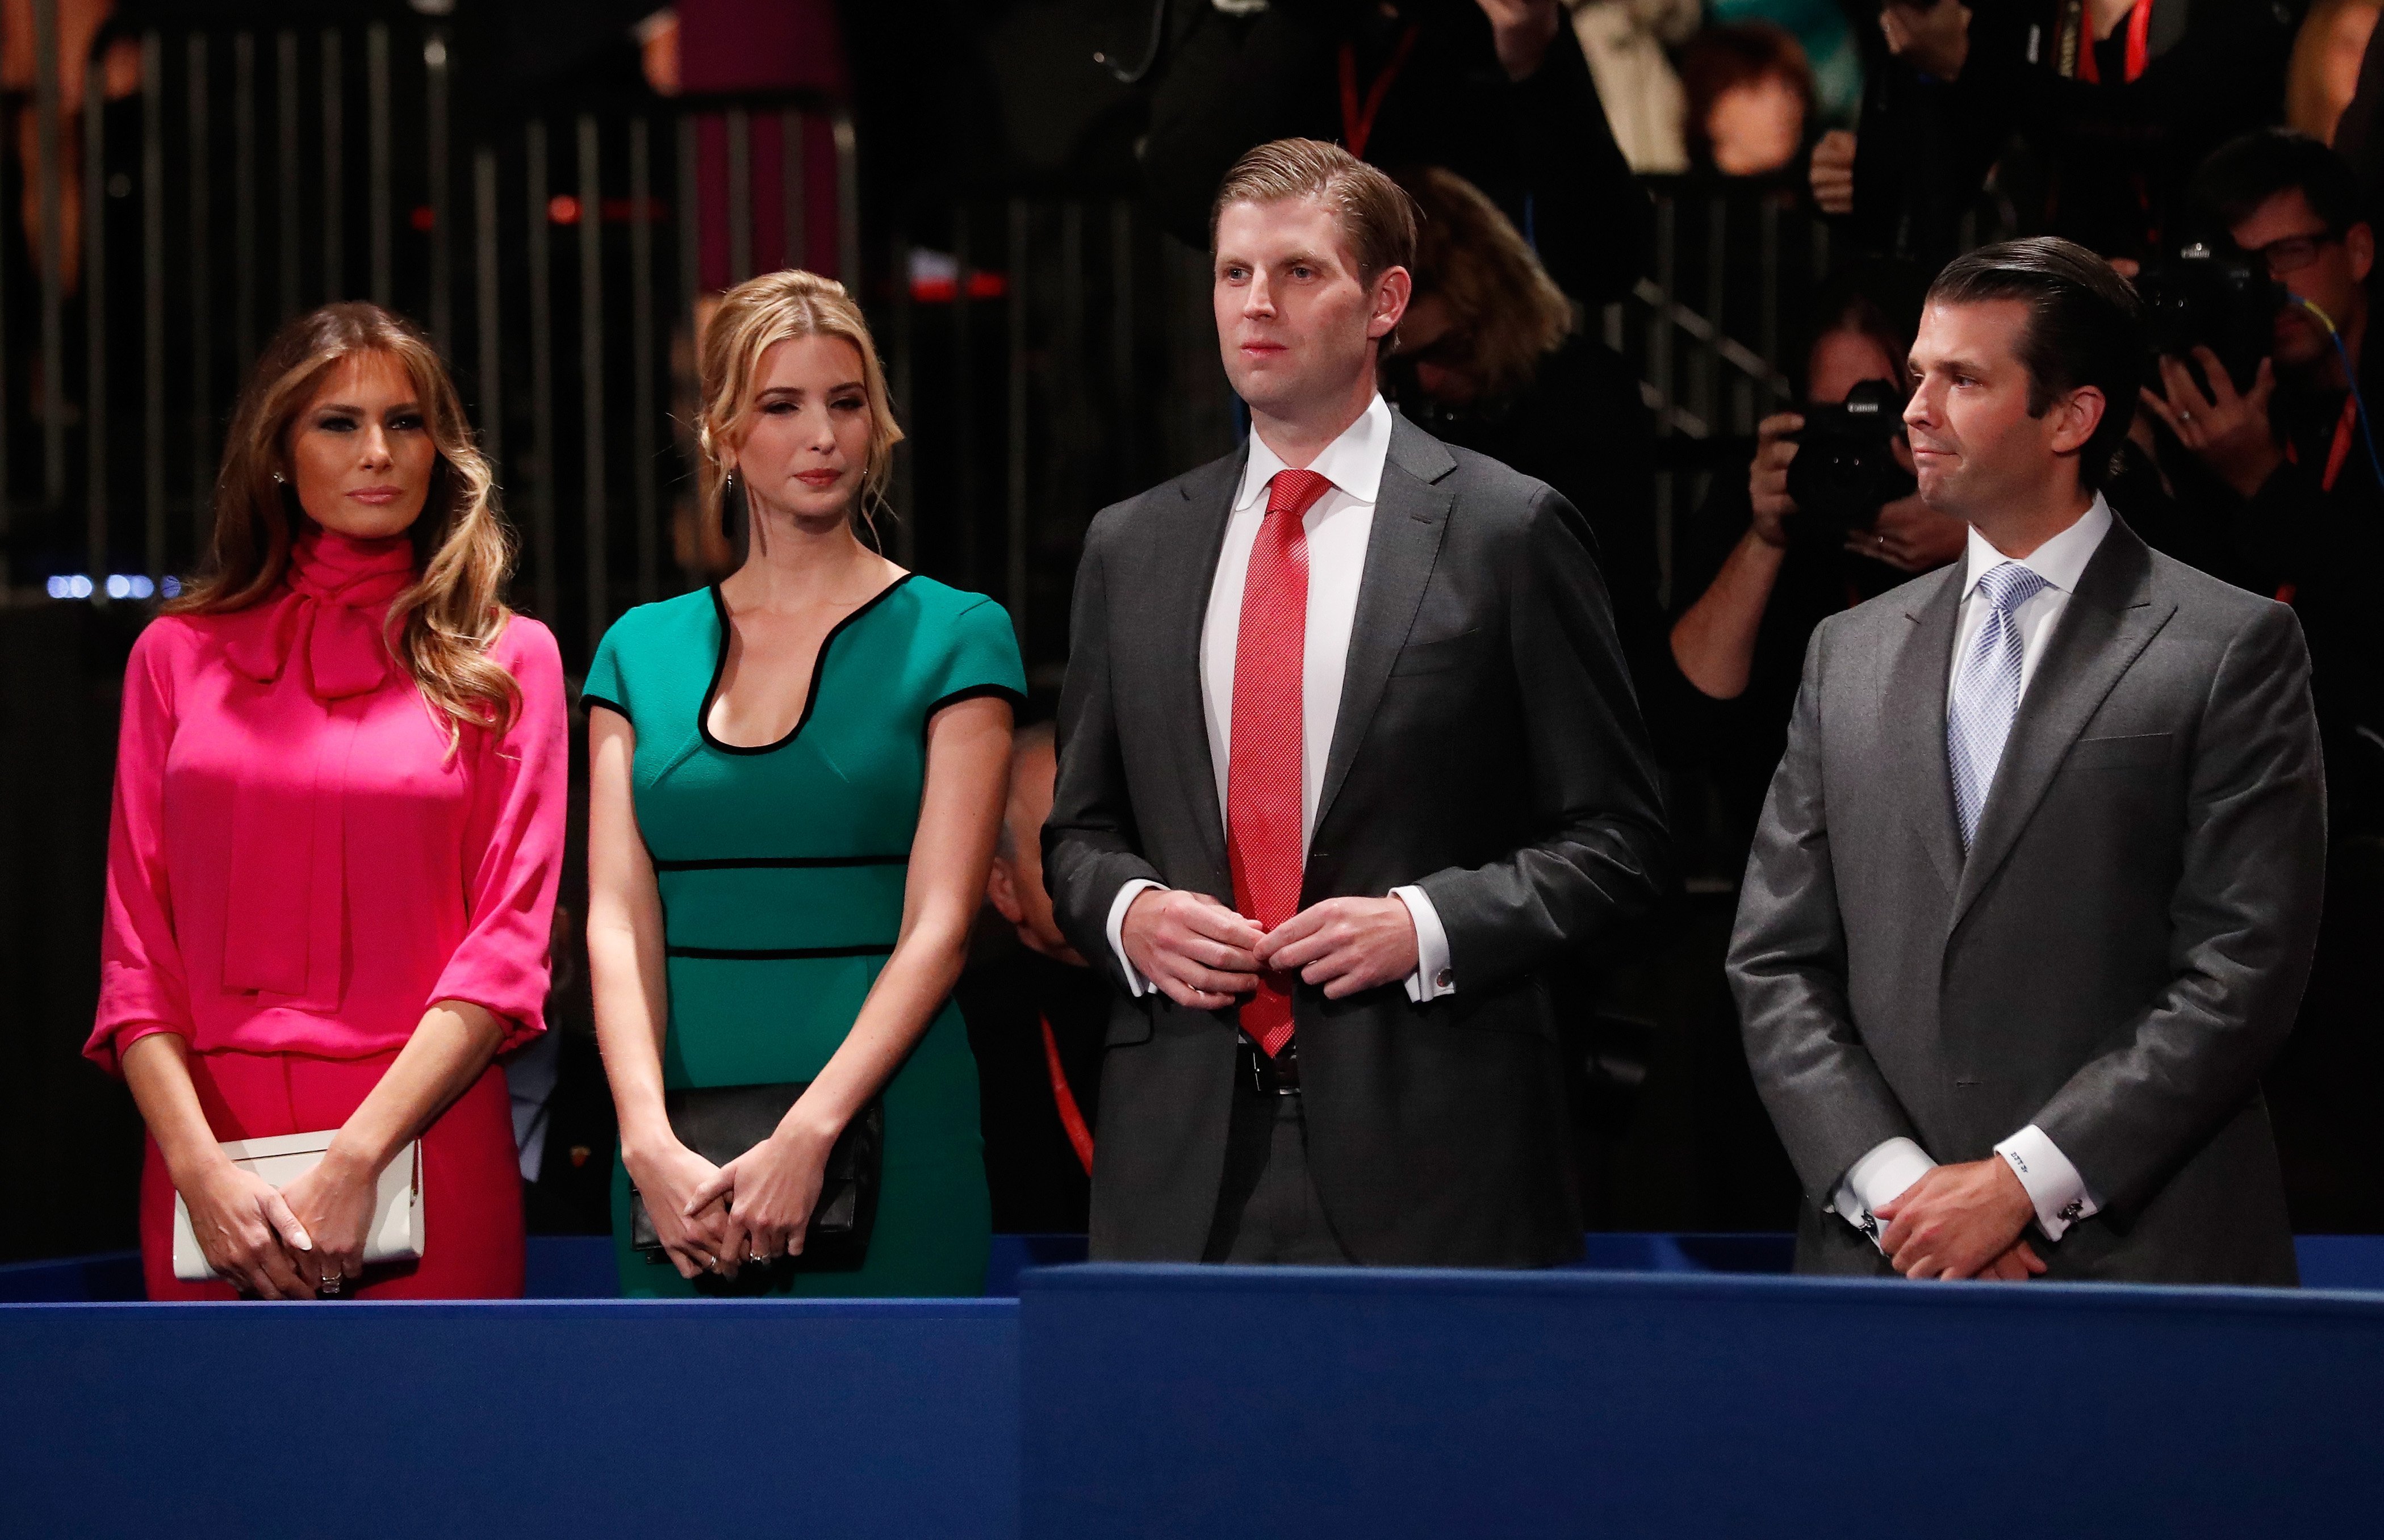 Donald Trump's wife Melania Trump, daughter Ivanka Trump, son Eric Trump and son Donald Trump, Jr. attend the town hall debate at Washington University on October 9, 2016, in St Louis, Missouri. | Source: Getty Images.